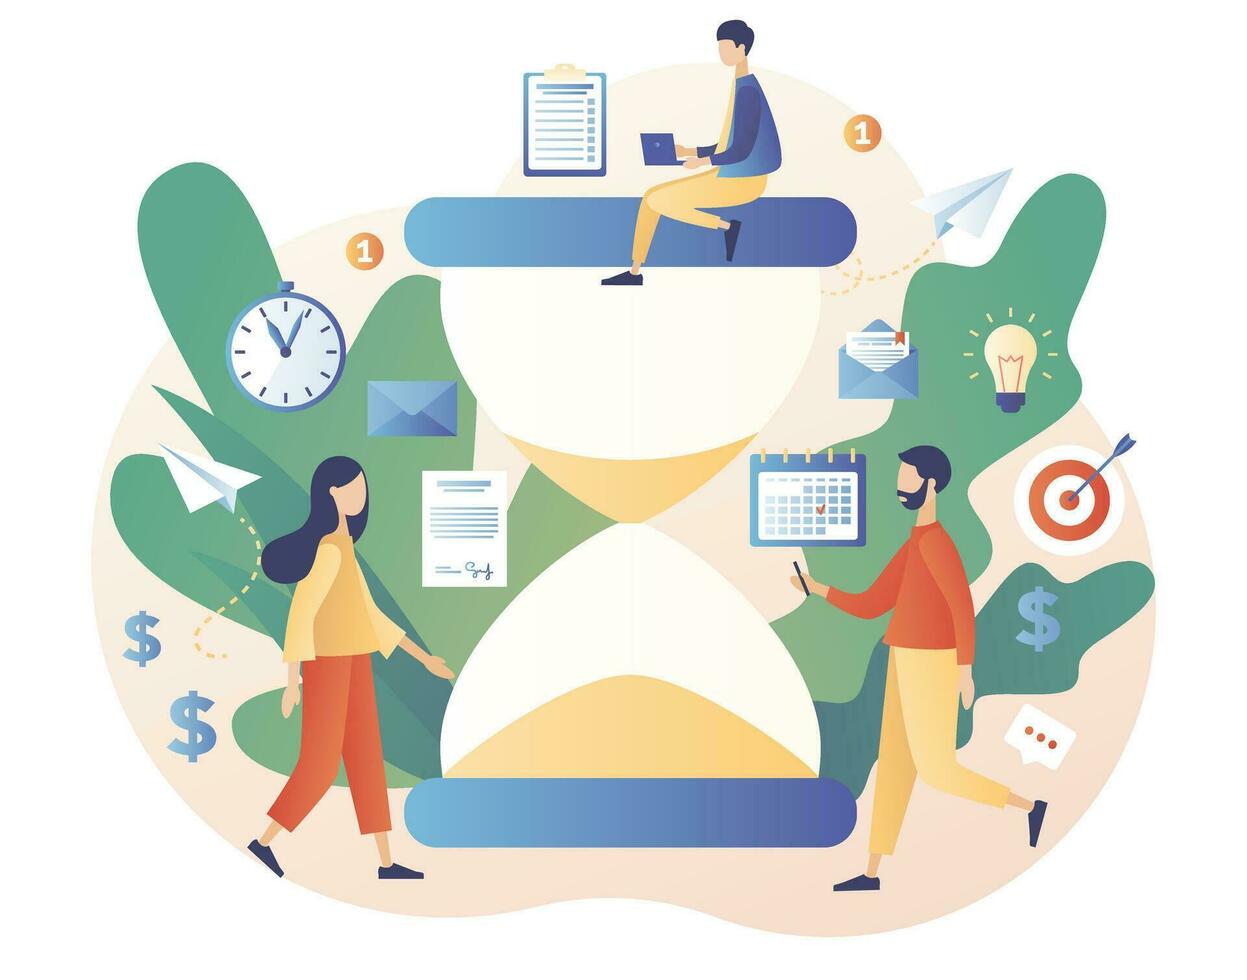 Deadline concept. Tiny people organize workflow. Time management and productivity. Hourglass as metaphor time management. Modern flat cartoon style. Vector illustration on white background